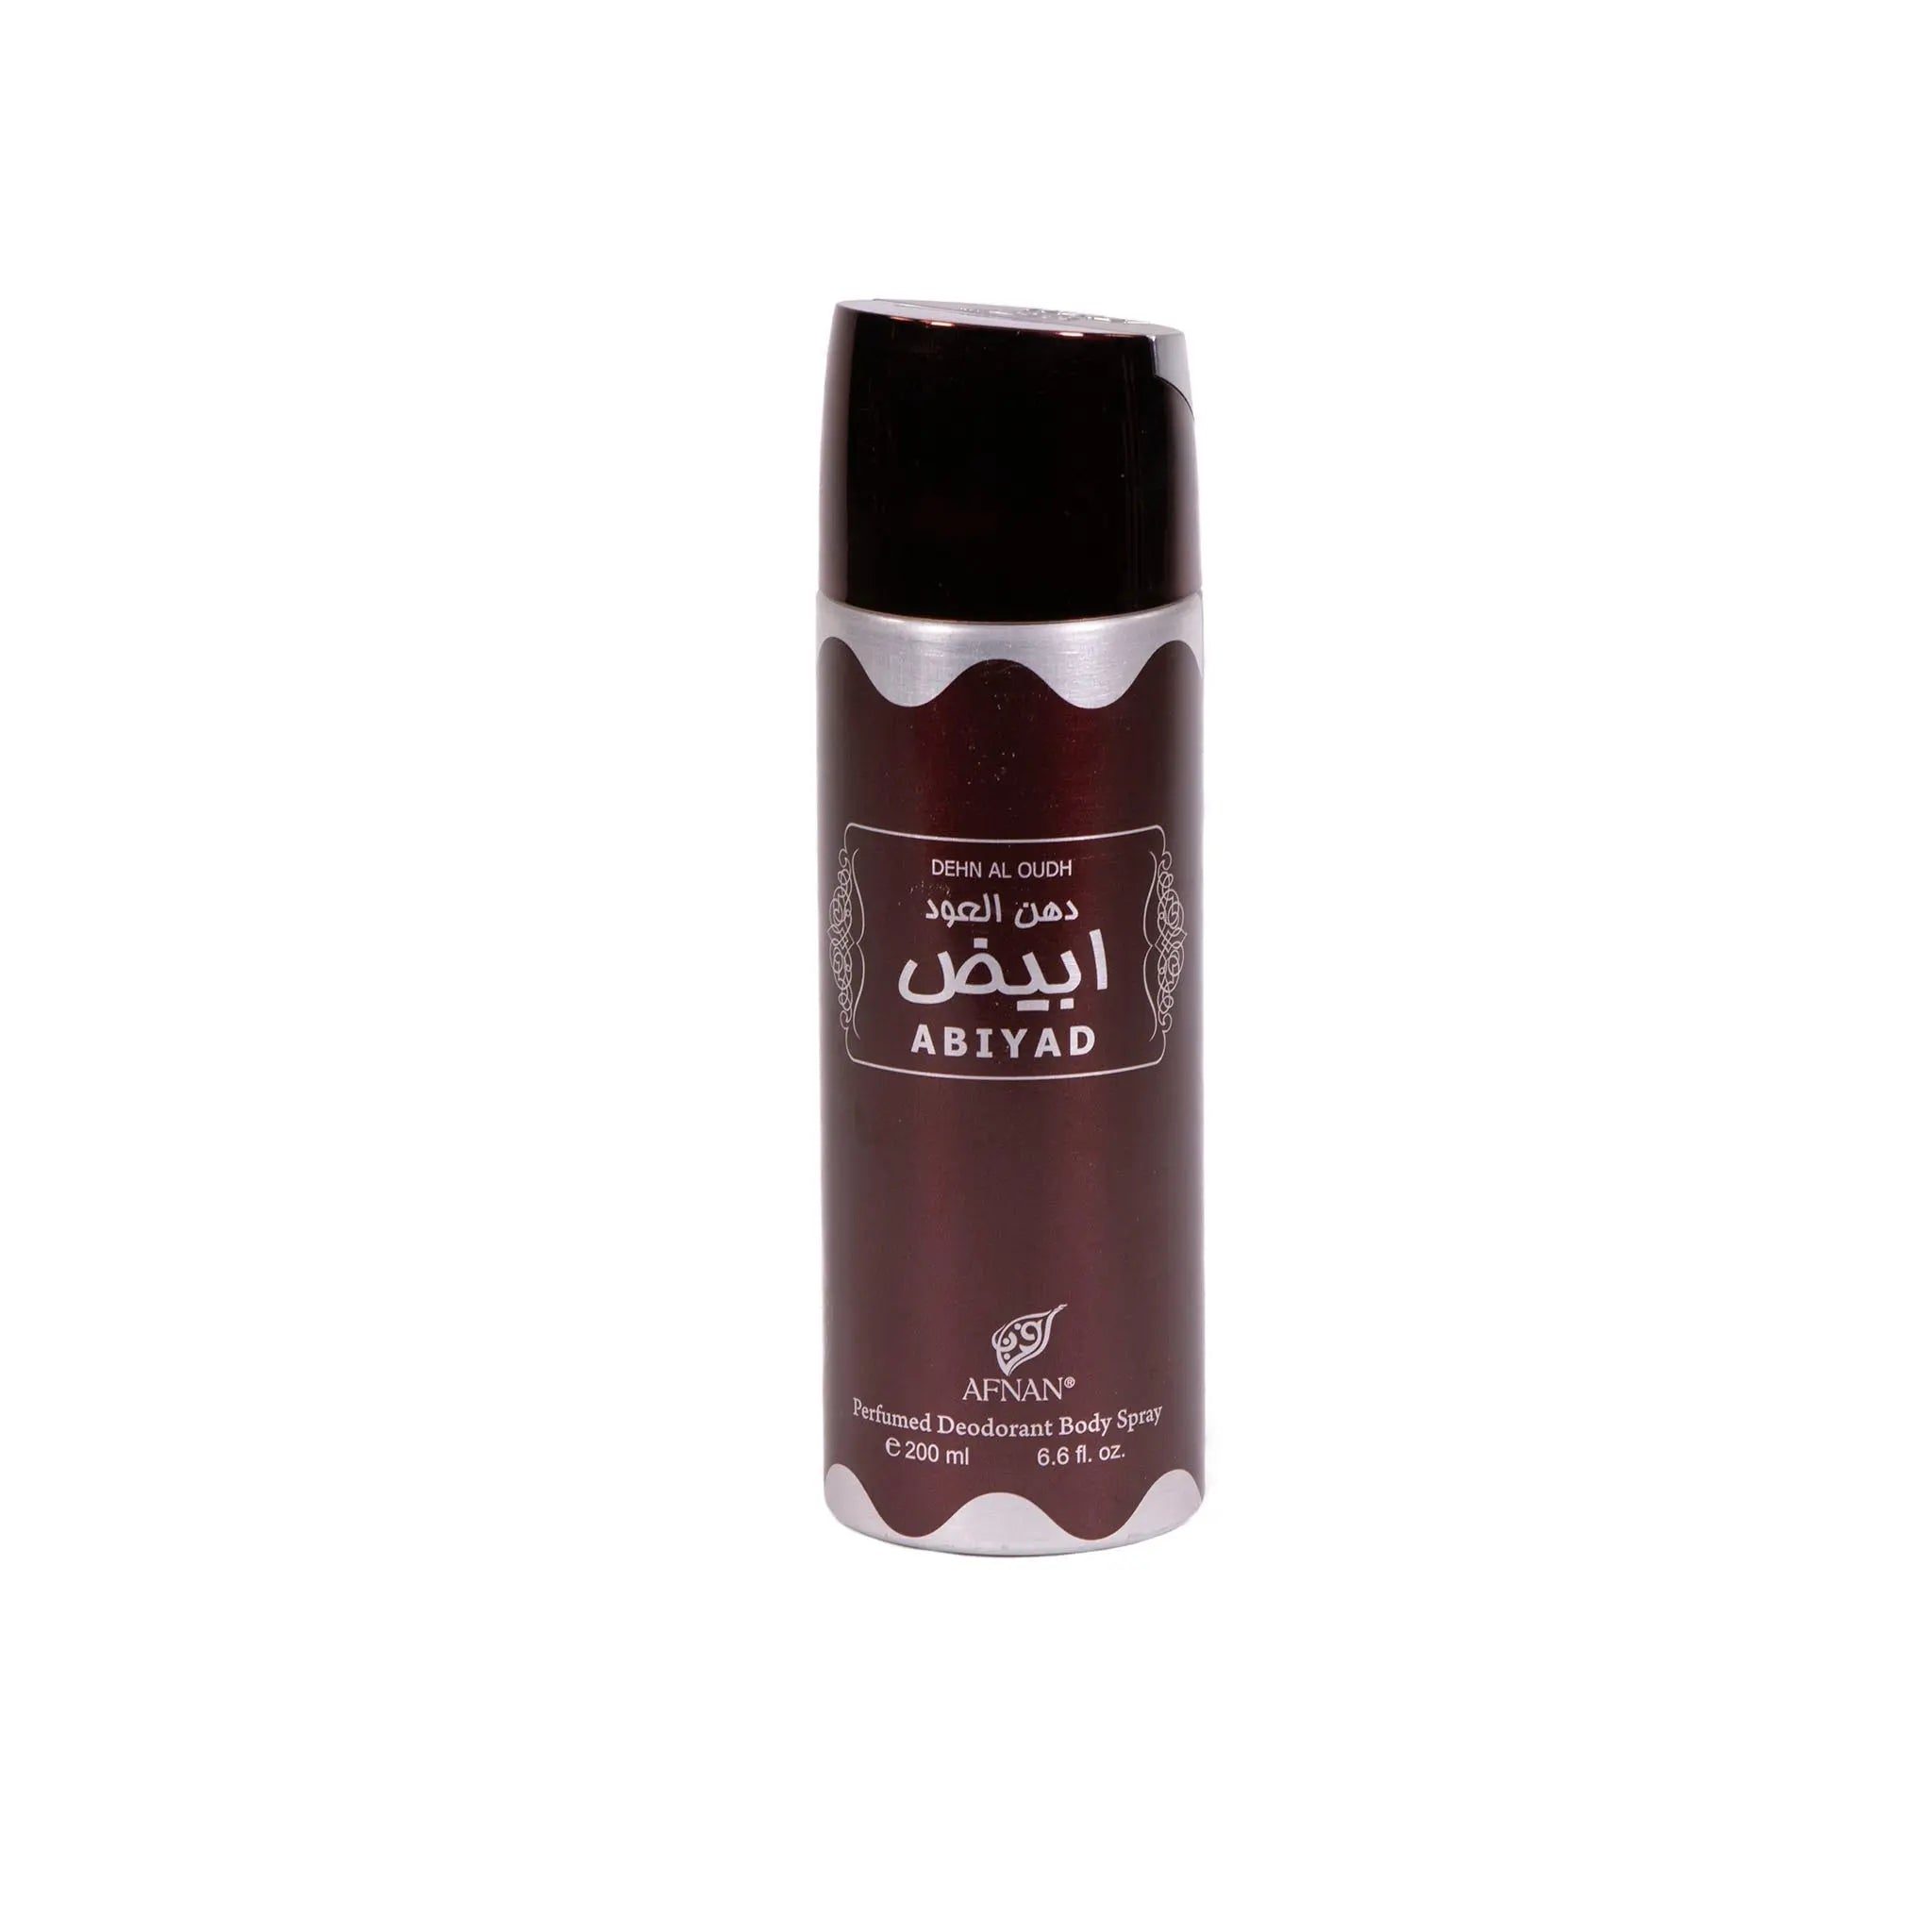 The image features a cylindrical deodorant body spray can. It has a dark brown color with a silver accent around the middle. On the front, there's an ornamental label with the words "DEHN AL OUDH ABIYAD" in English, along with Arabic calligraphy that likely mirrors the product name. Below the script, the brand name "AFNAN" is printed. Additional product information indicates that it is a "Perfumed Deodorant Body Spray" and contains "E 200 ml 6.8 fl. oz." 